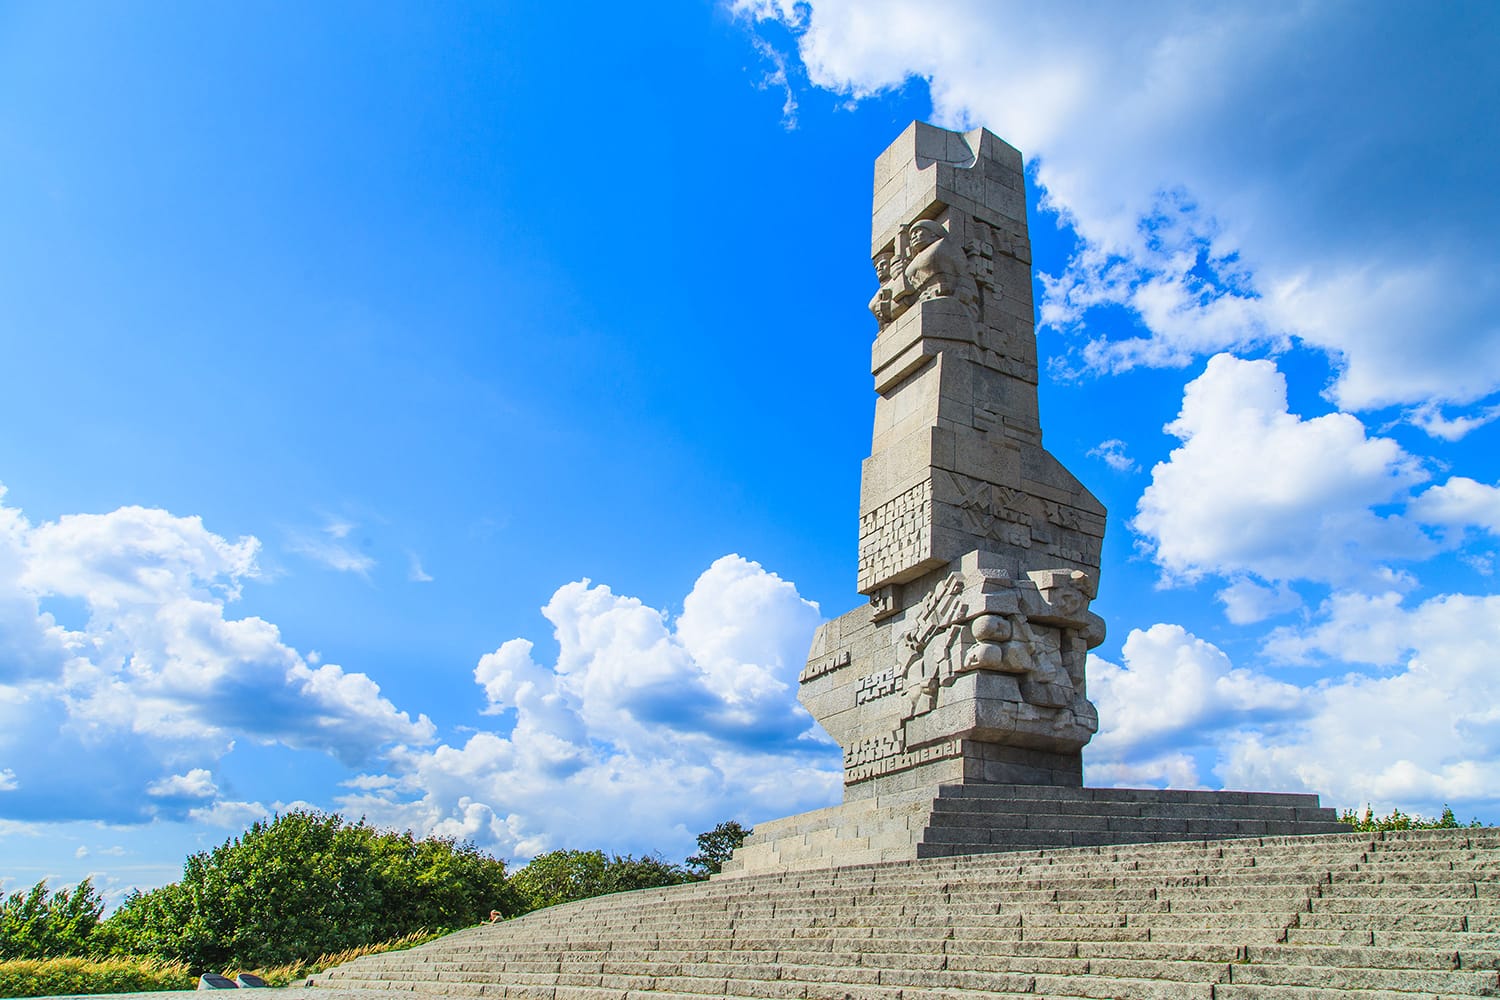 Westerplatte. Monument commemorating first battle of Second World War and Polish Defense in 1939